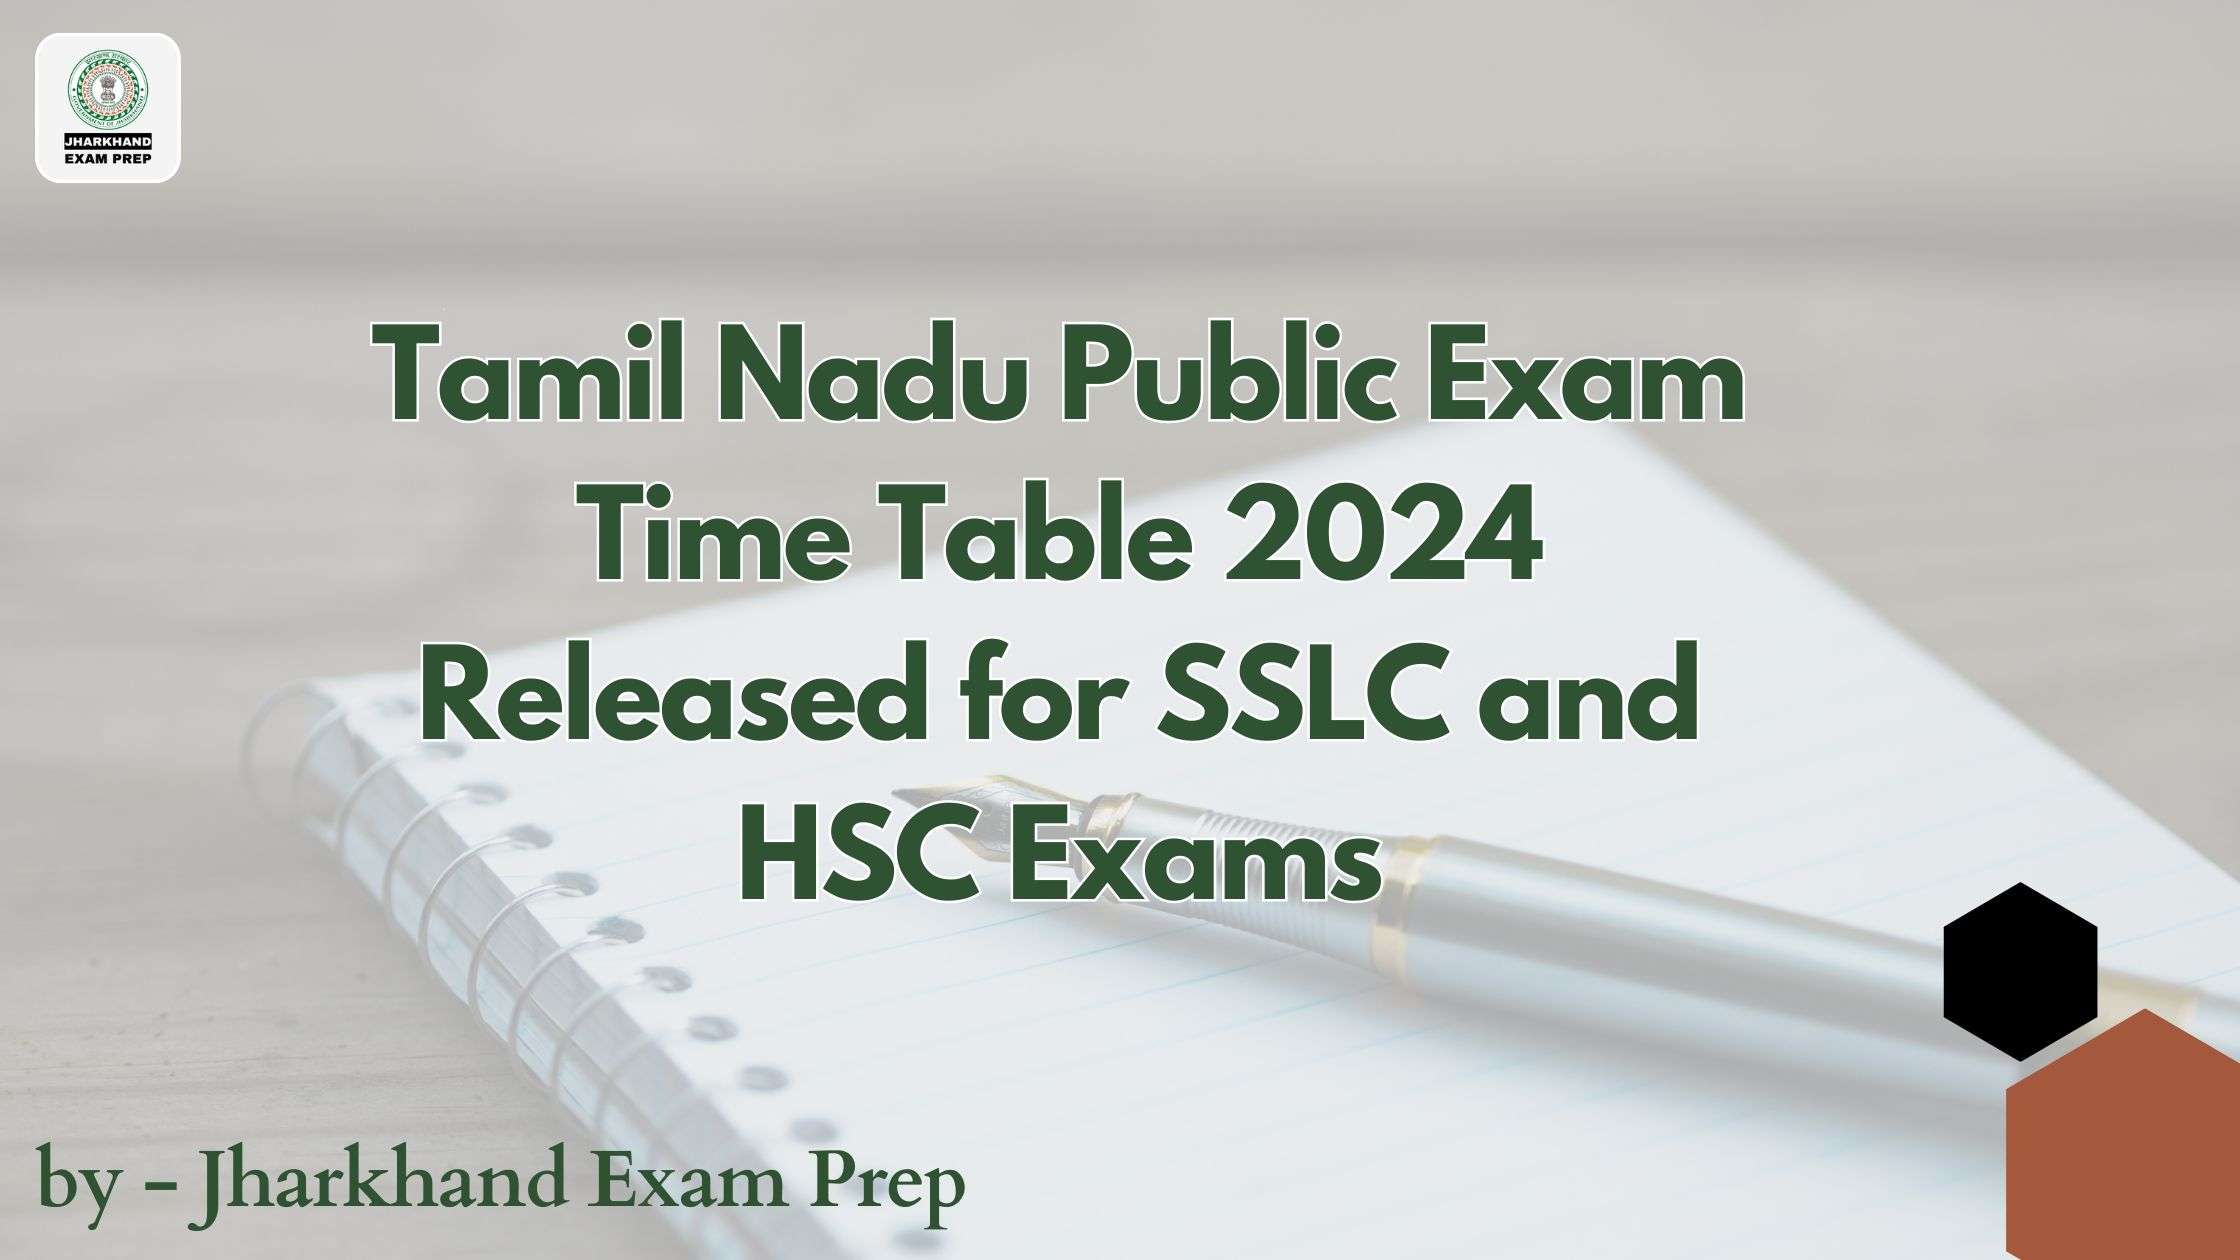 Tamil Nadu Public Exam Time Table 2024 Released for SSLC and HSC Exams